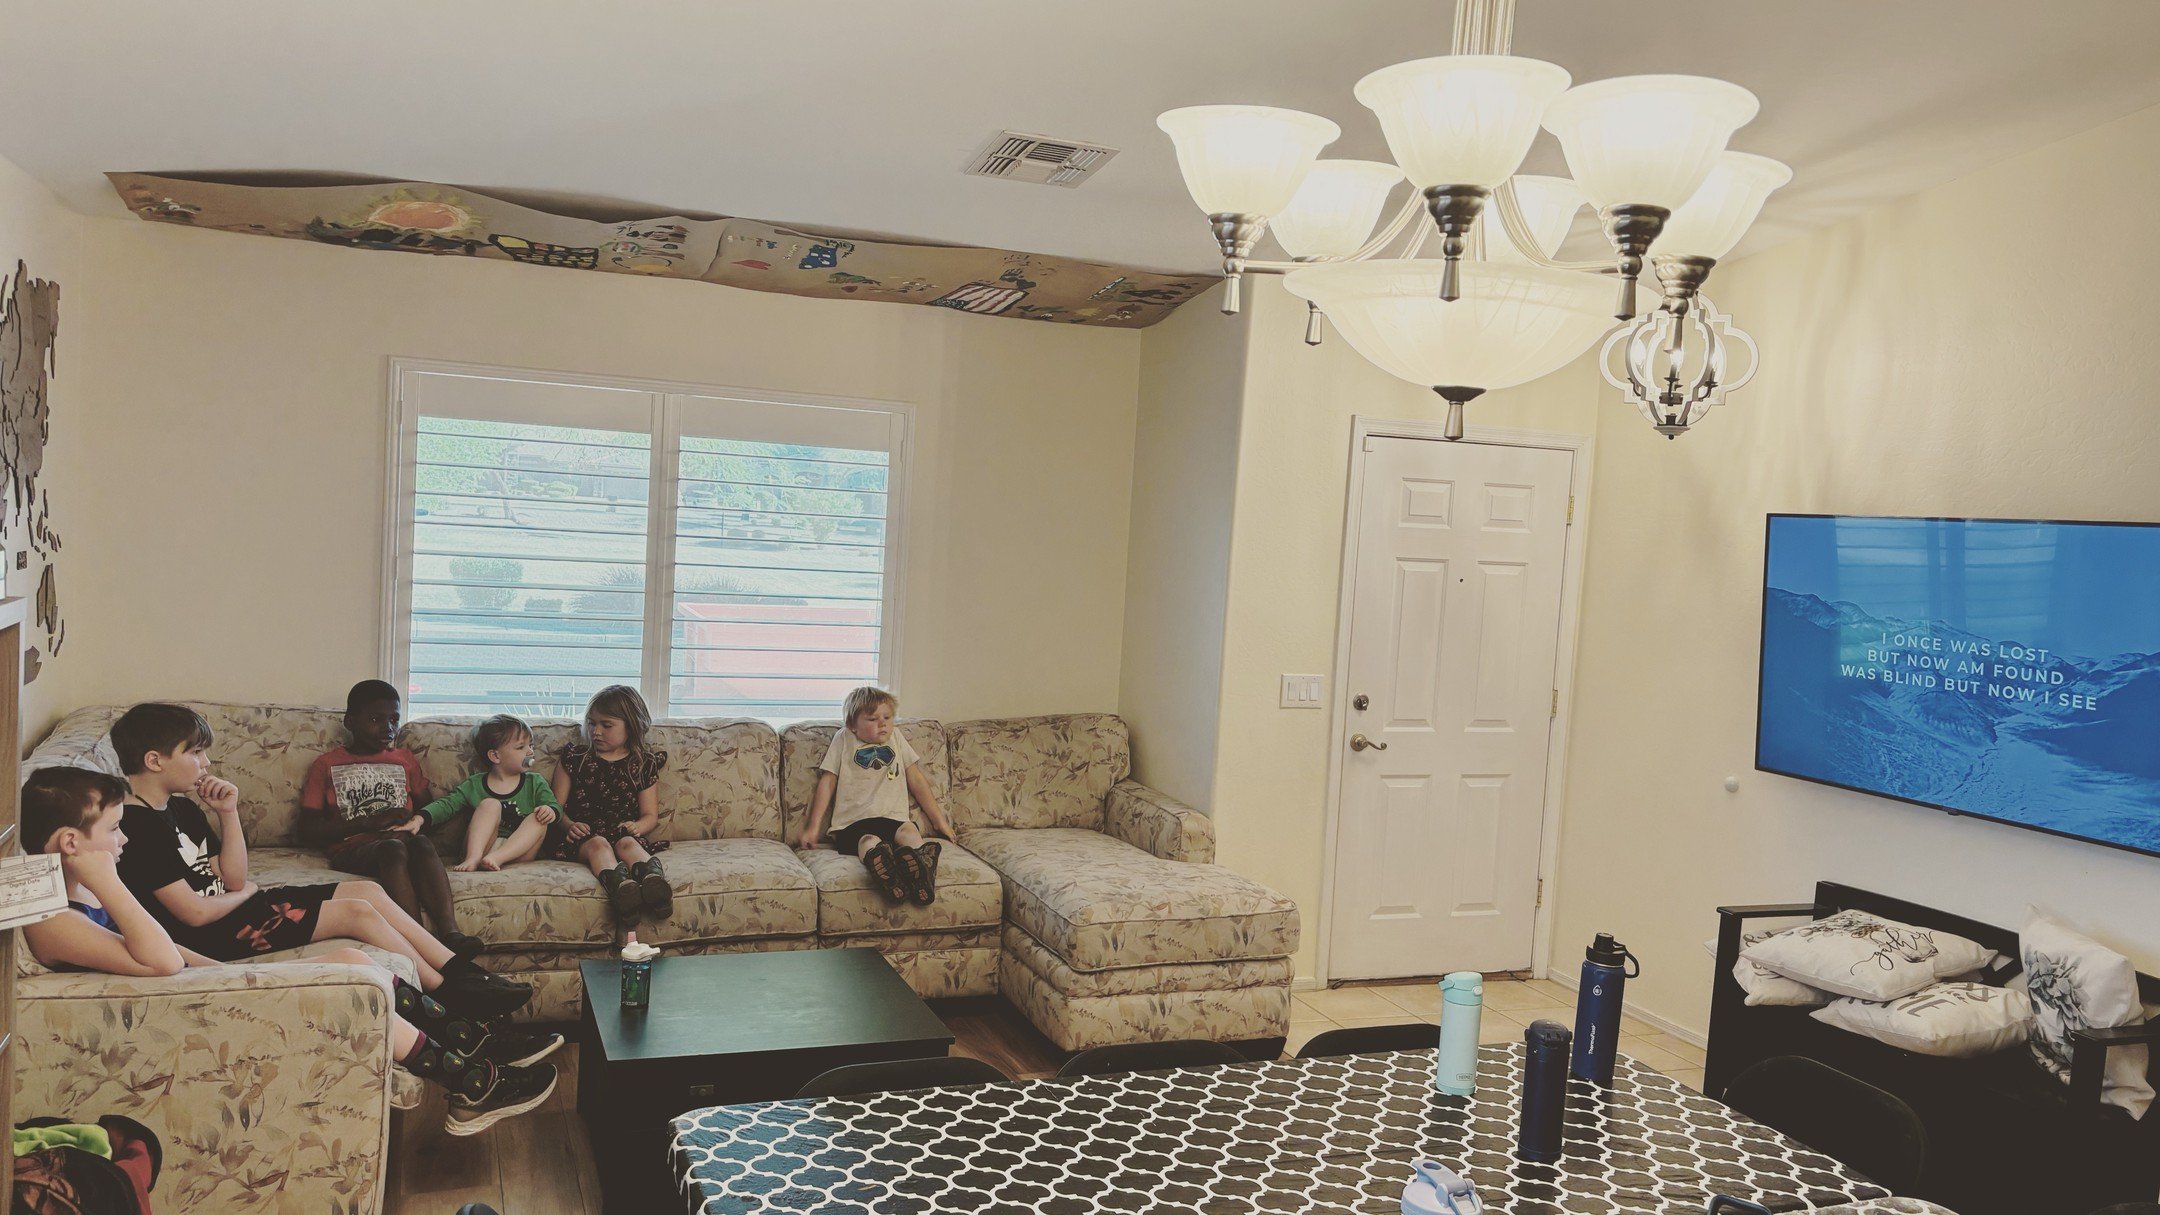 A little glimpse at our Hymn Study time. As a part of our Bible time first thing each morning, we meet to read and discuss the bible, recite scripture, and study hymns. I love it when the kids occasionally just start humming a familiar hymn at some o